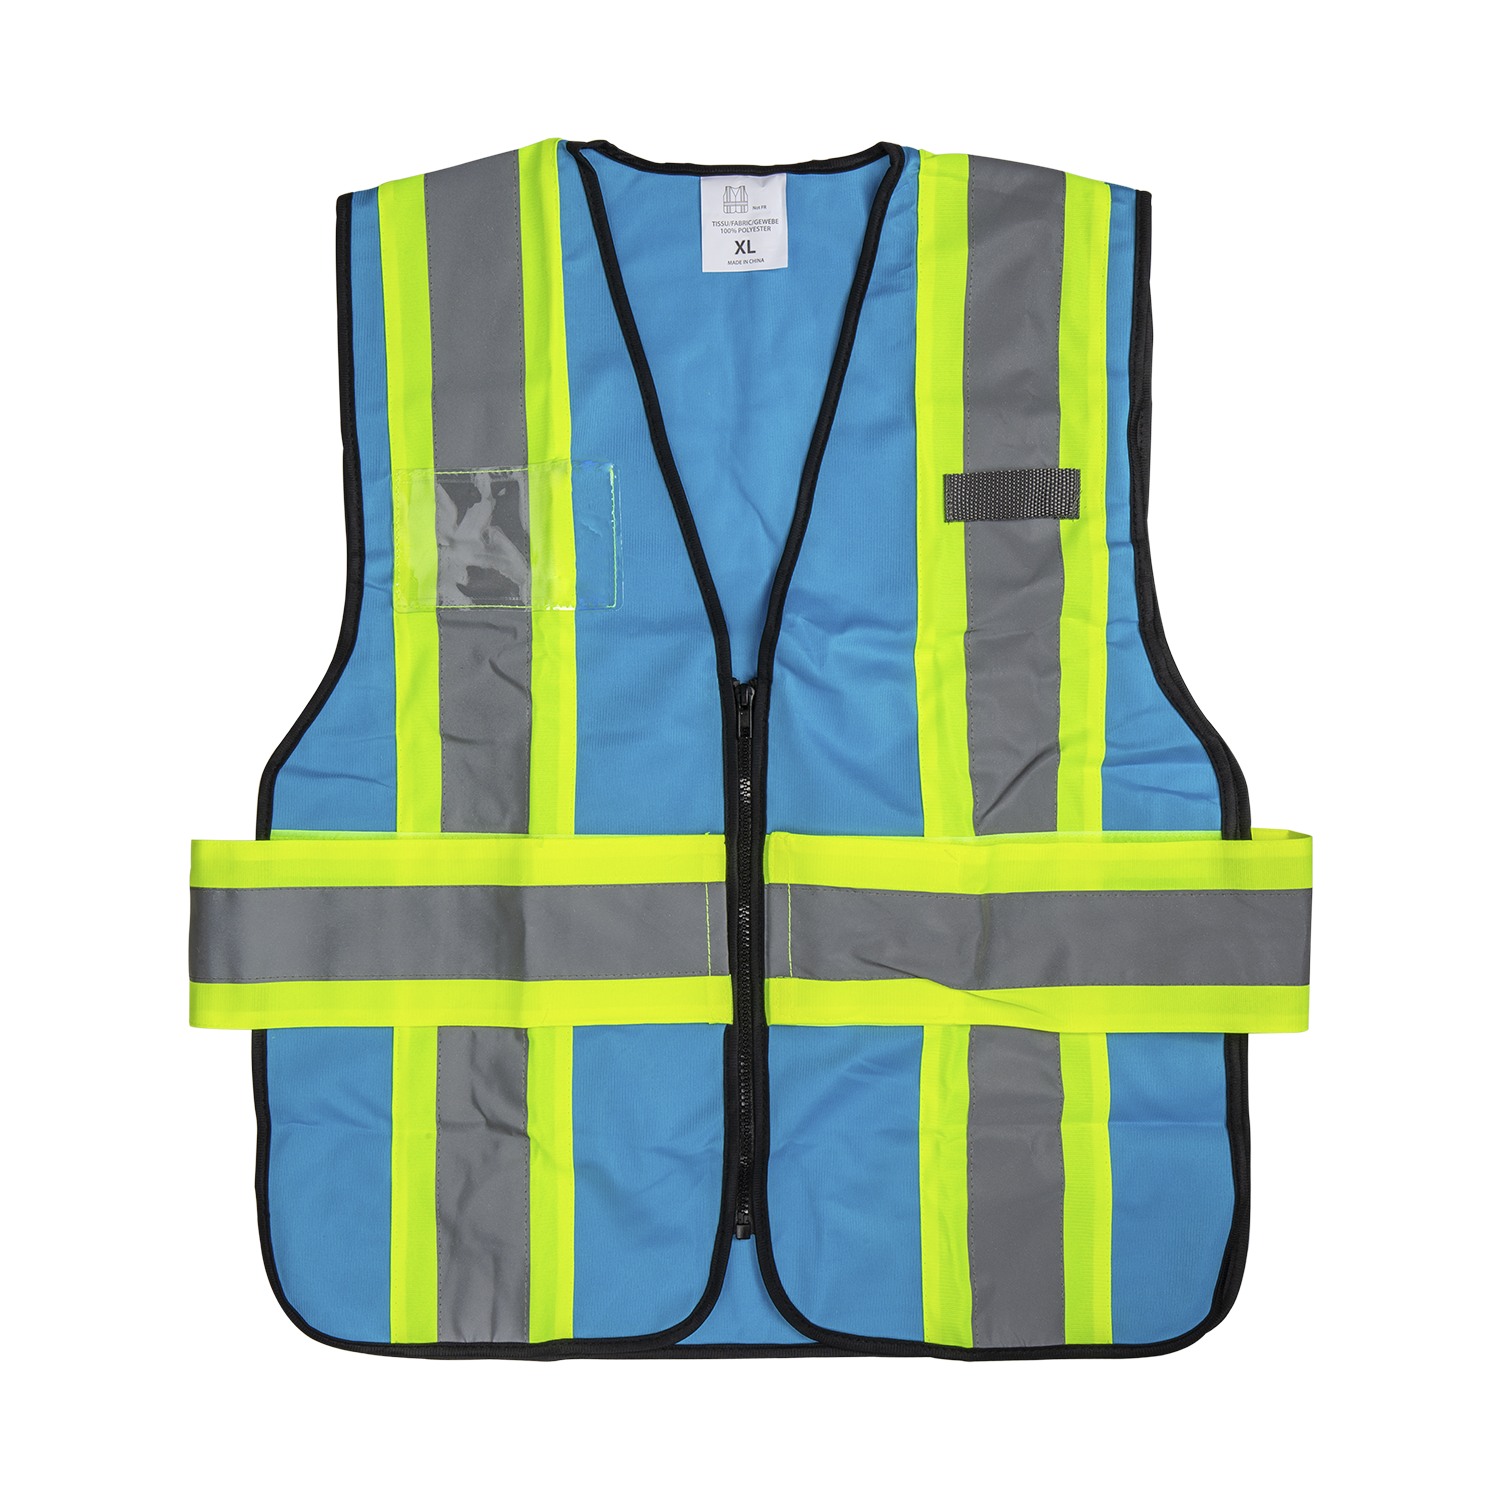 Highlight Reflective Tape for Safety Clothing - China Safety